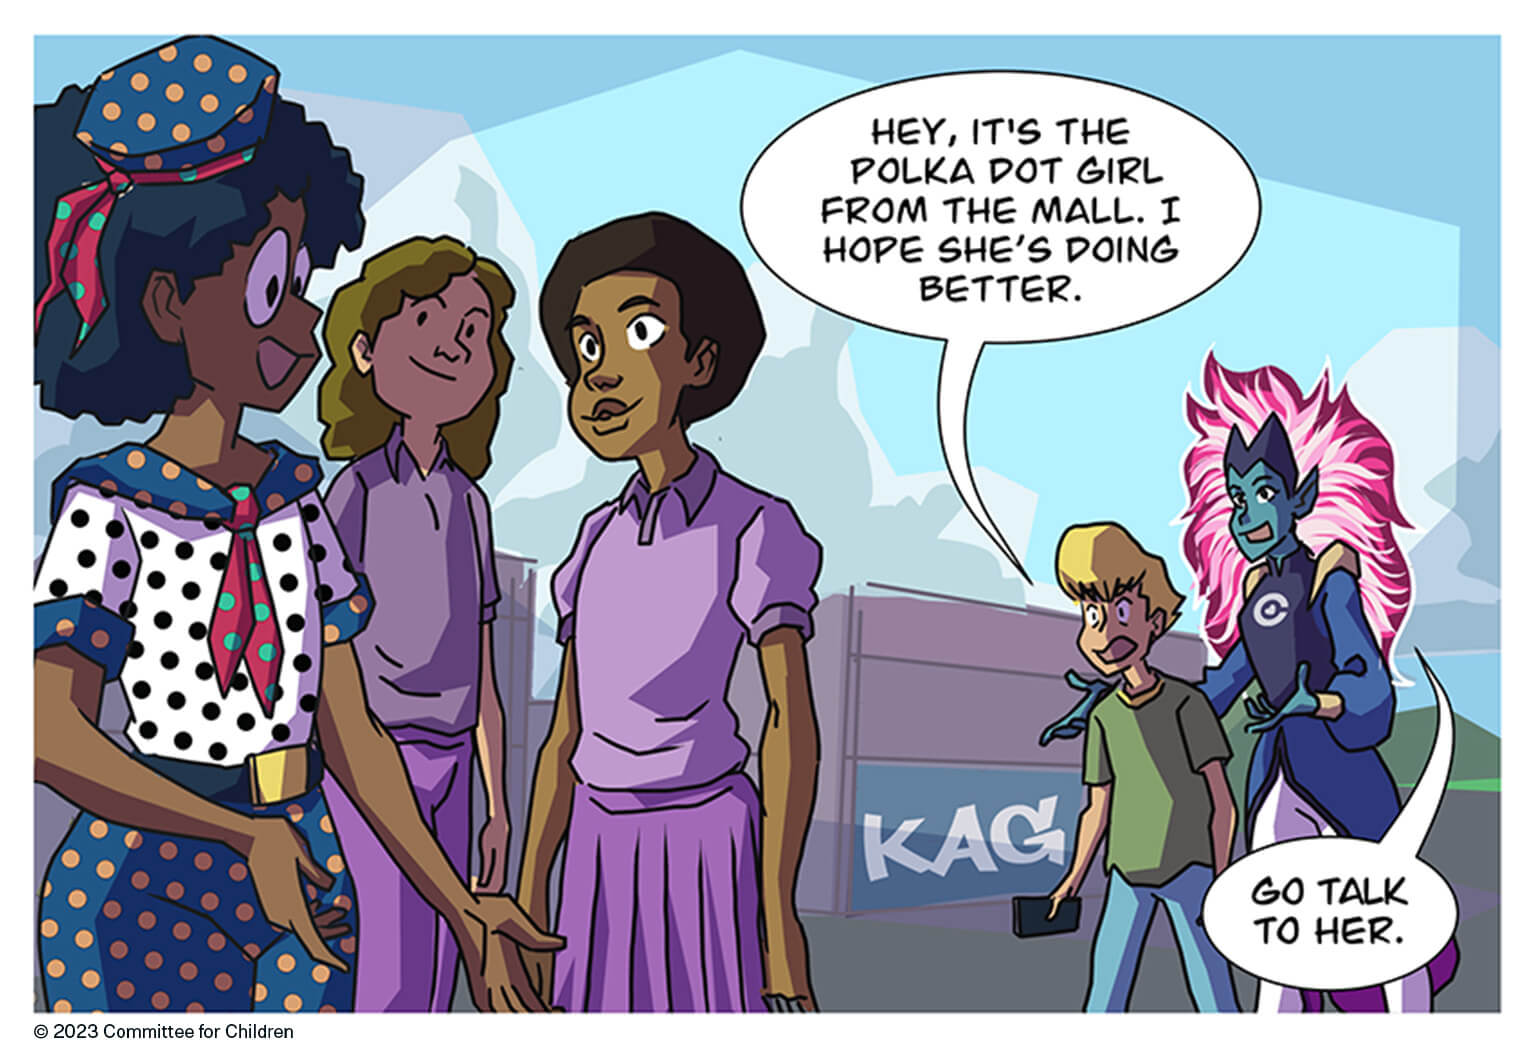 Three students stand in the foreground chatting, including a girl in polka dots that Jake bullied in the past. In the background, Jake comes to a halt. 

“Hey, it’s the polka dot girl from the mall,” he says to Captain Compassion, embarrassed. “I hope she’s doing better.”

Captain Compassion puts her arm around Jake and encourages him. “Go talk to her,” she says.
